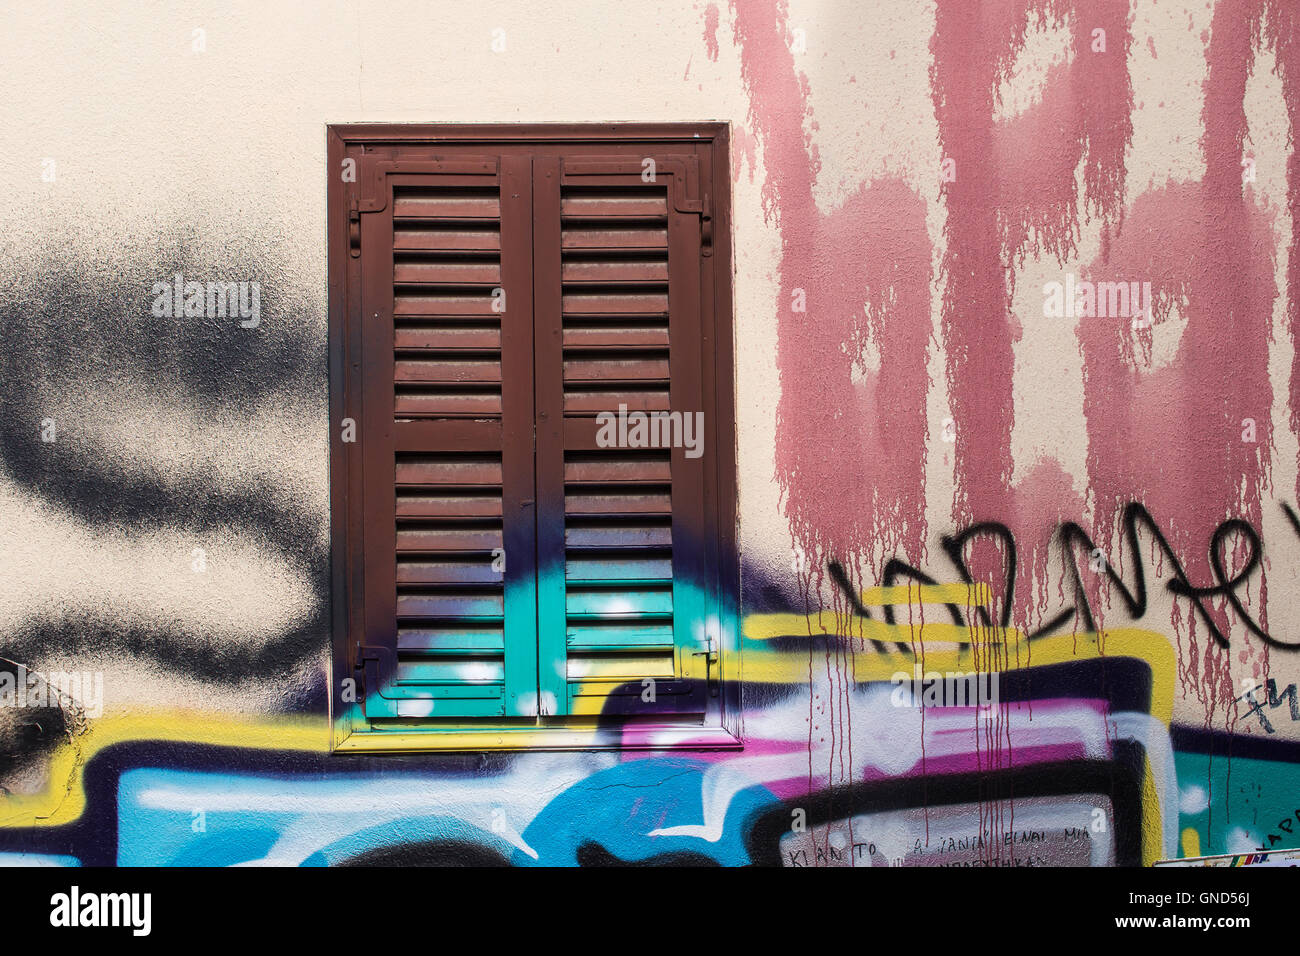 Neutral basic color of the facade of the house. Window covered with brown shutter. Many colorful graffiti tags. Plaka district o Stock Photo